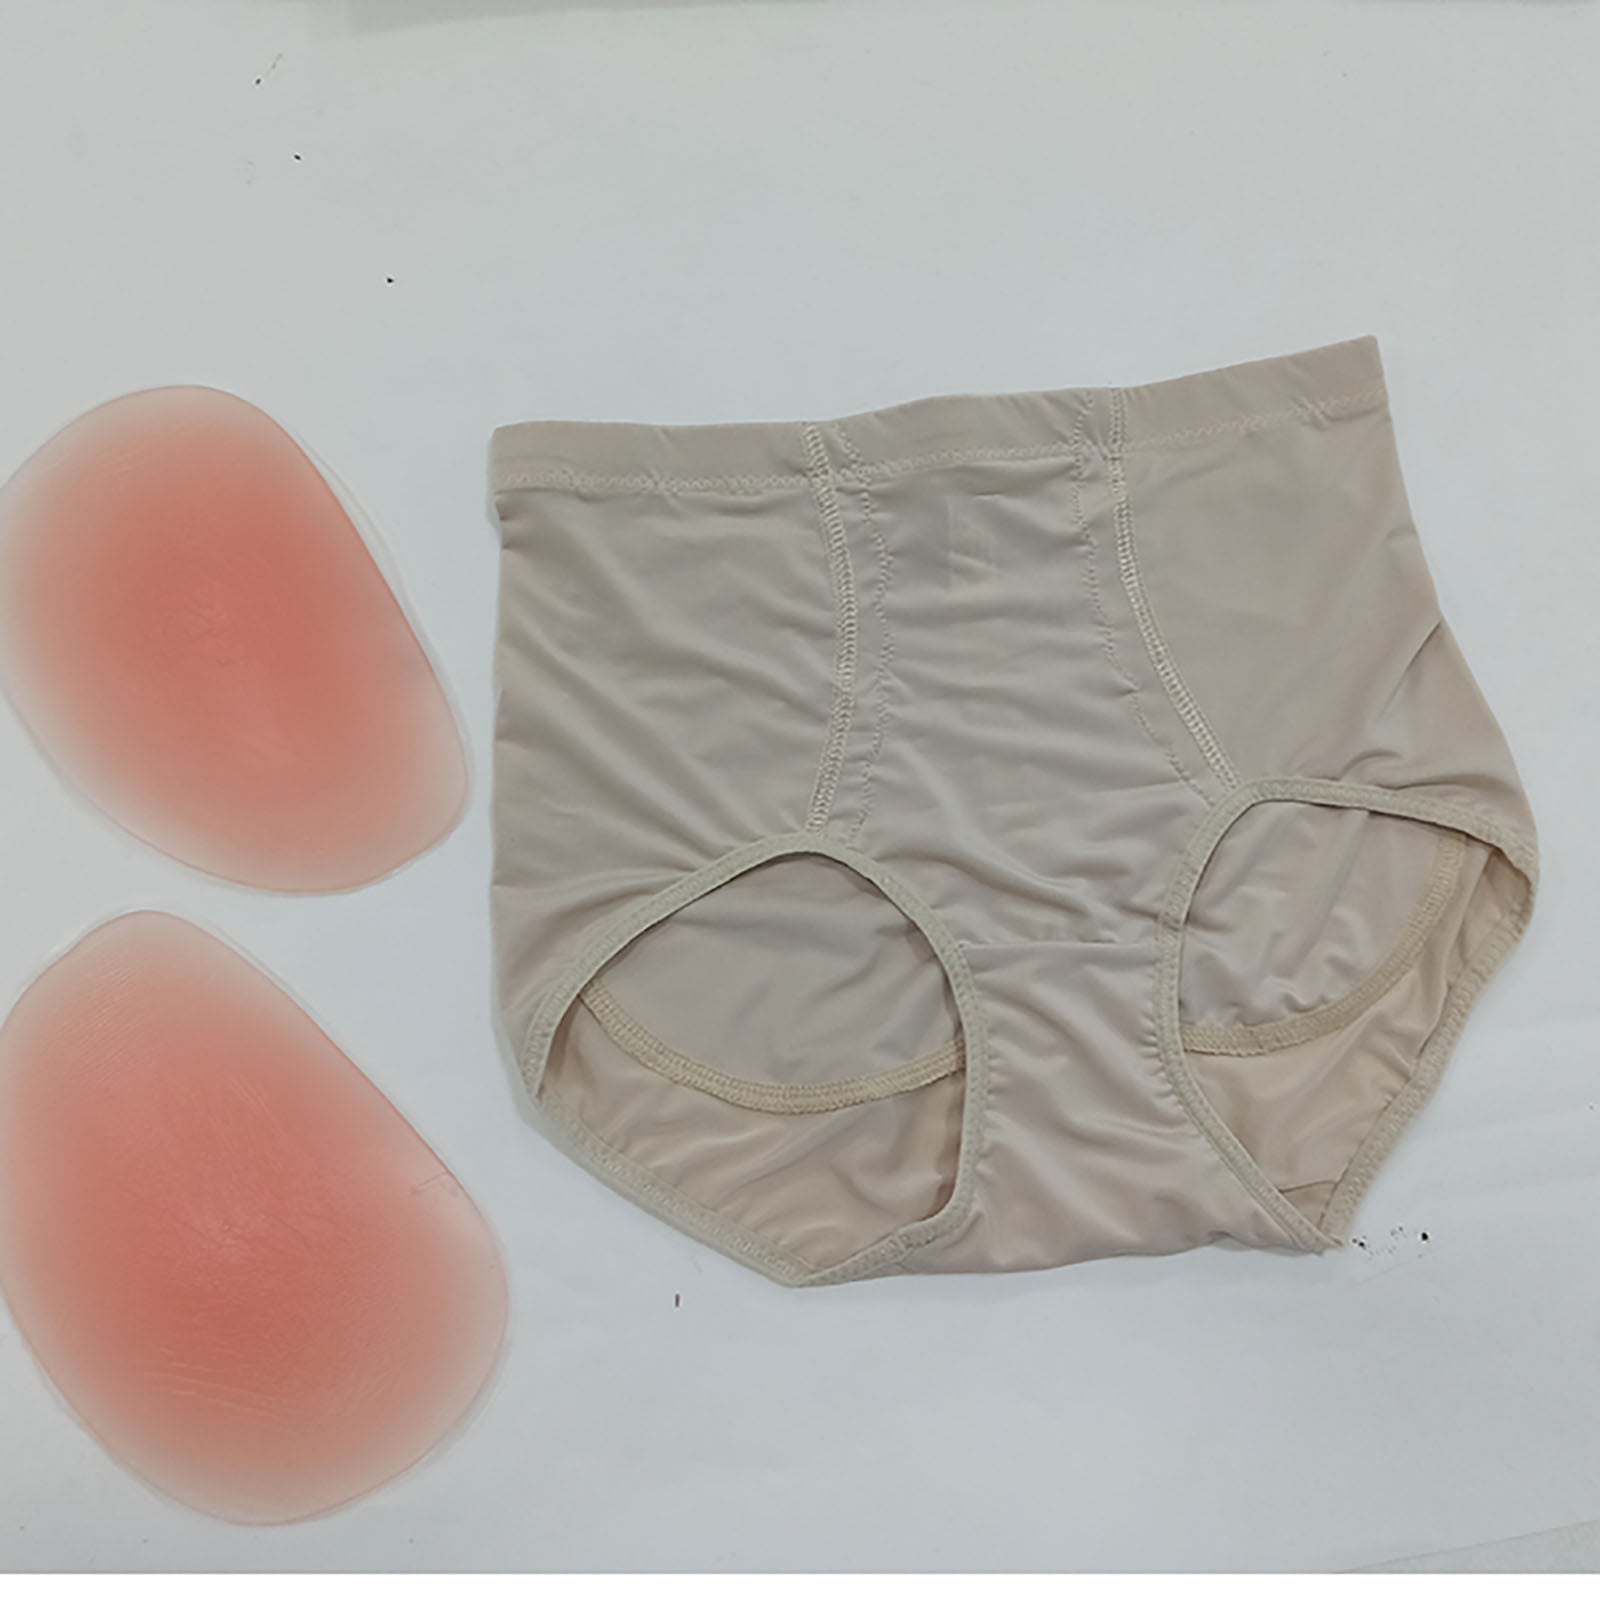 Find Cheap, Fashionable and Slimming silicone padded underwear